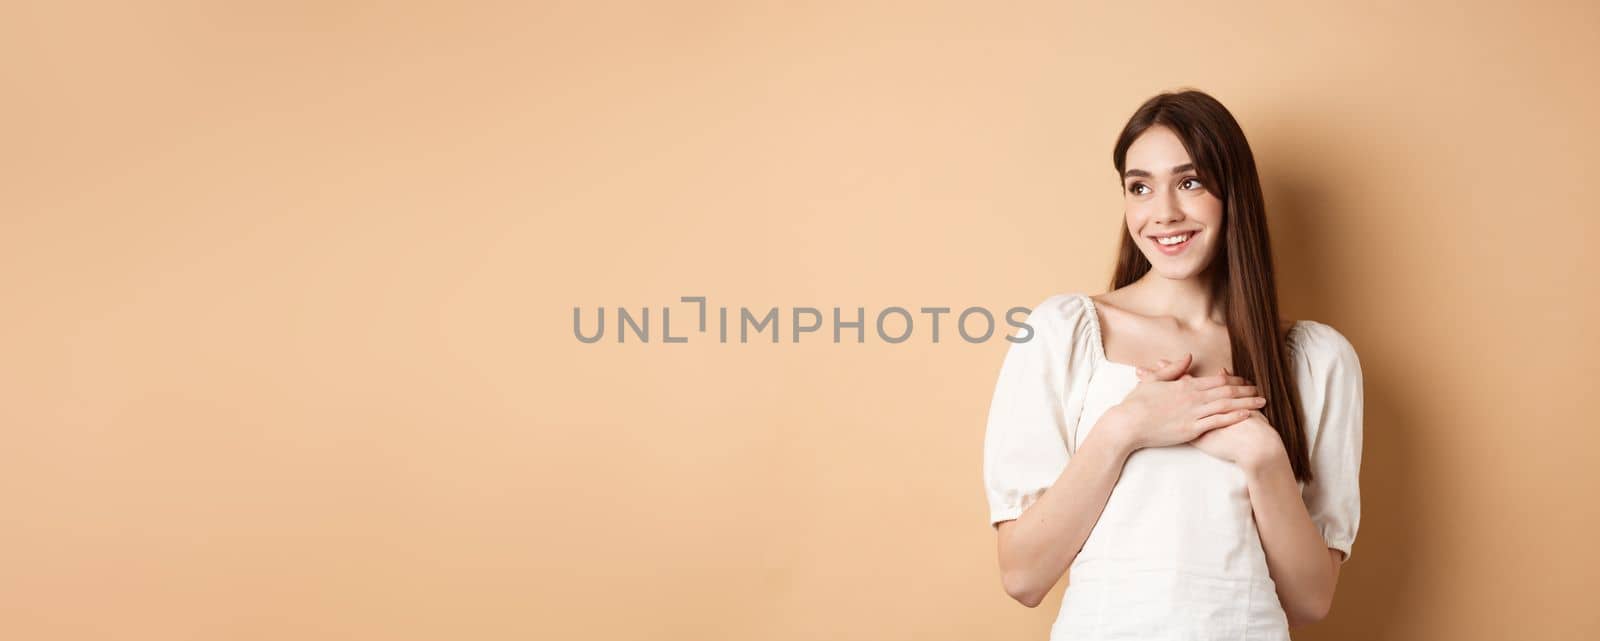 Romantic young girl in dress holding hands on heart, smiling and looking at empty space thankful, feeling gratitude, standing on beige background.